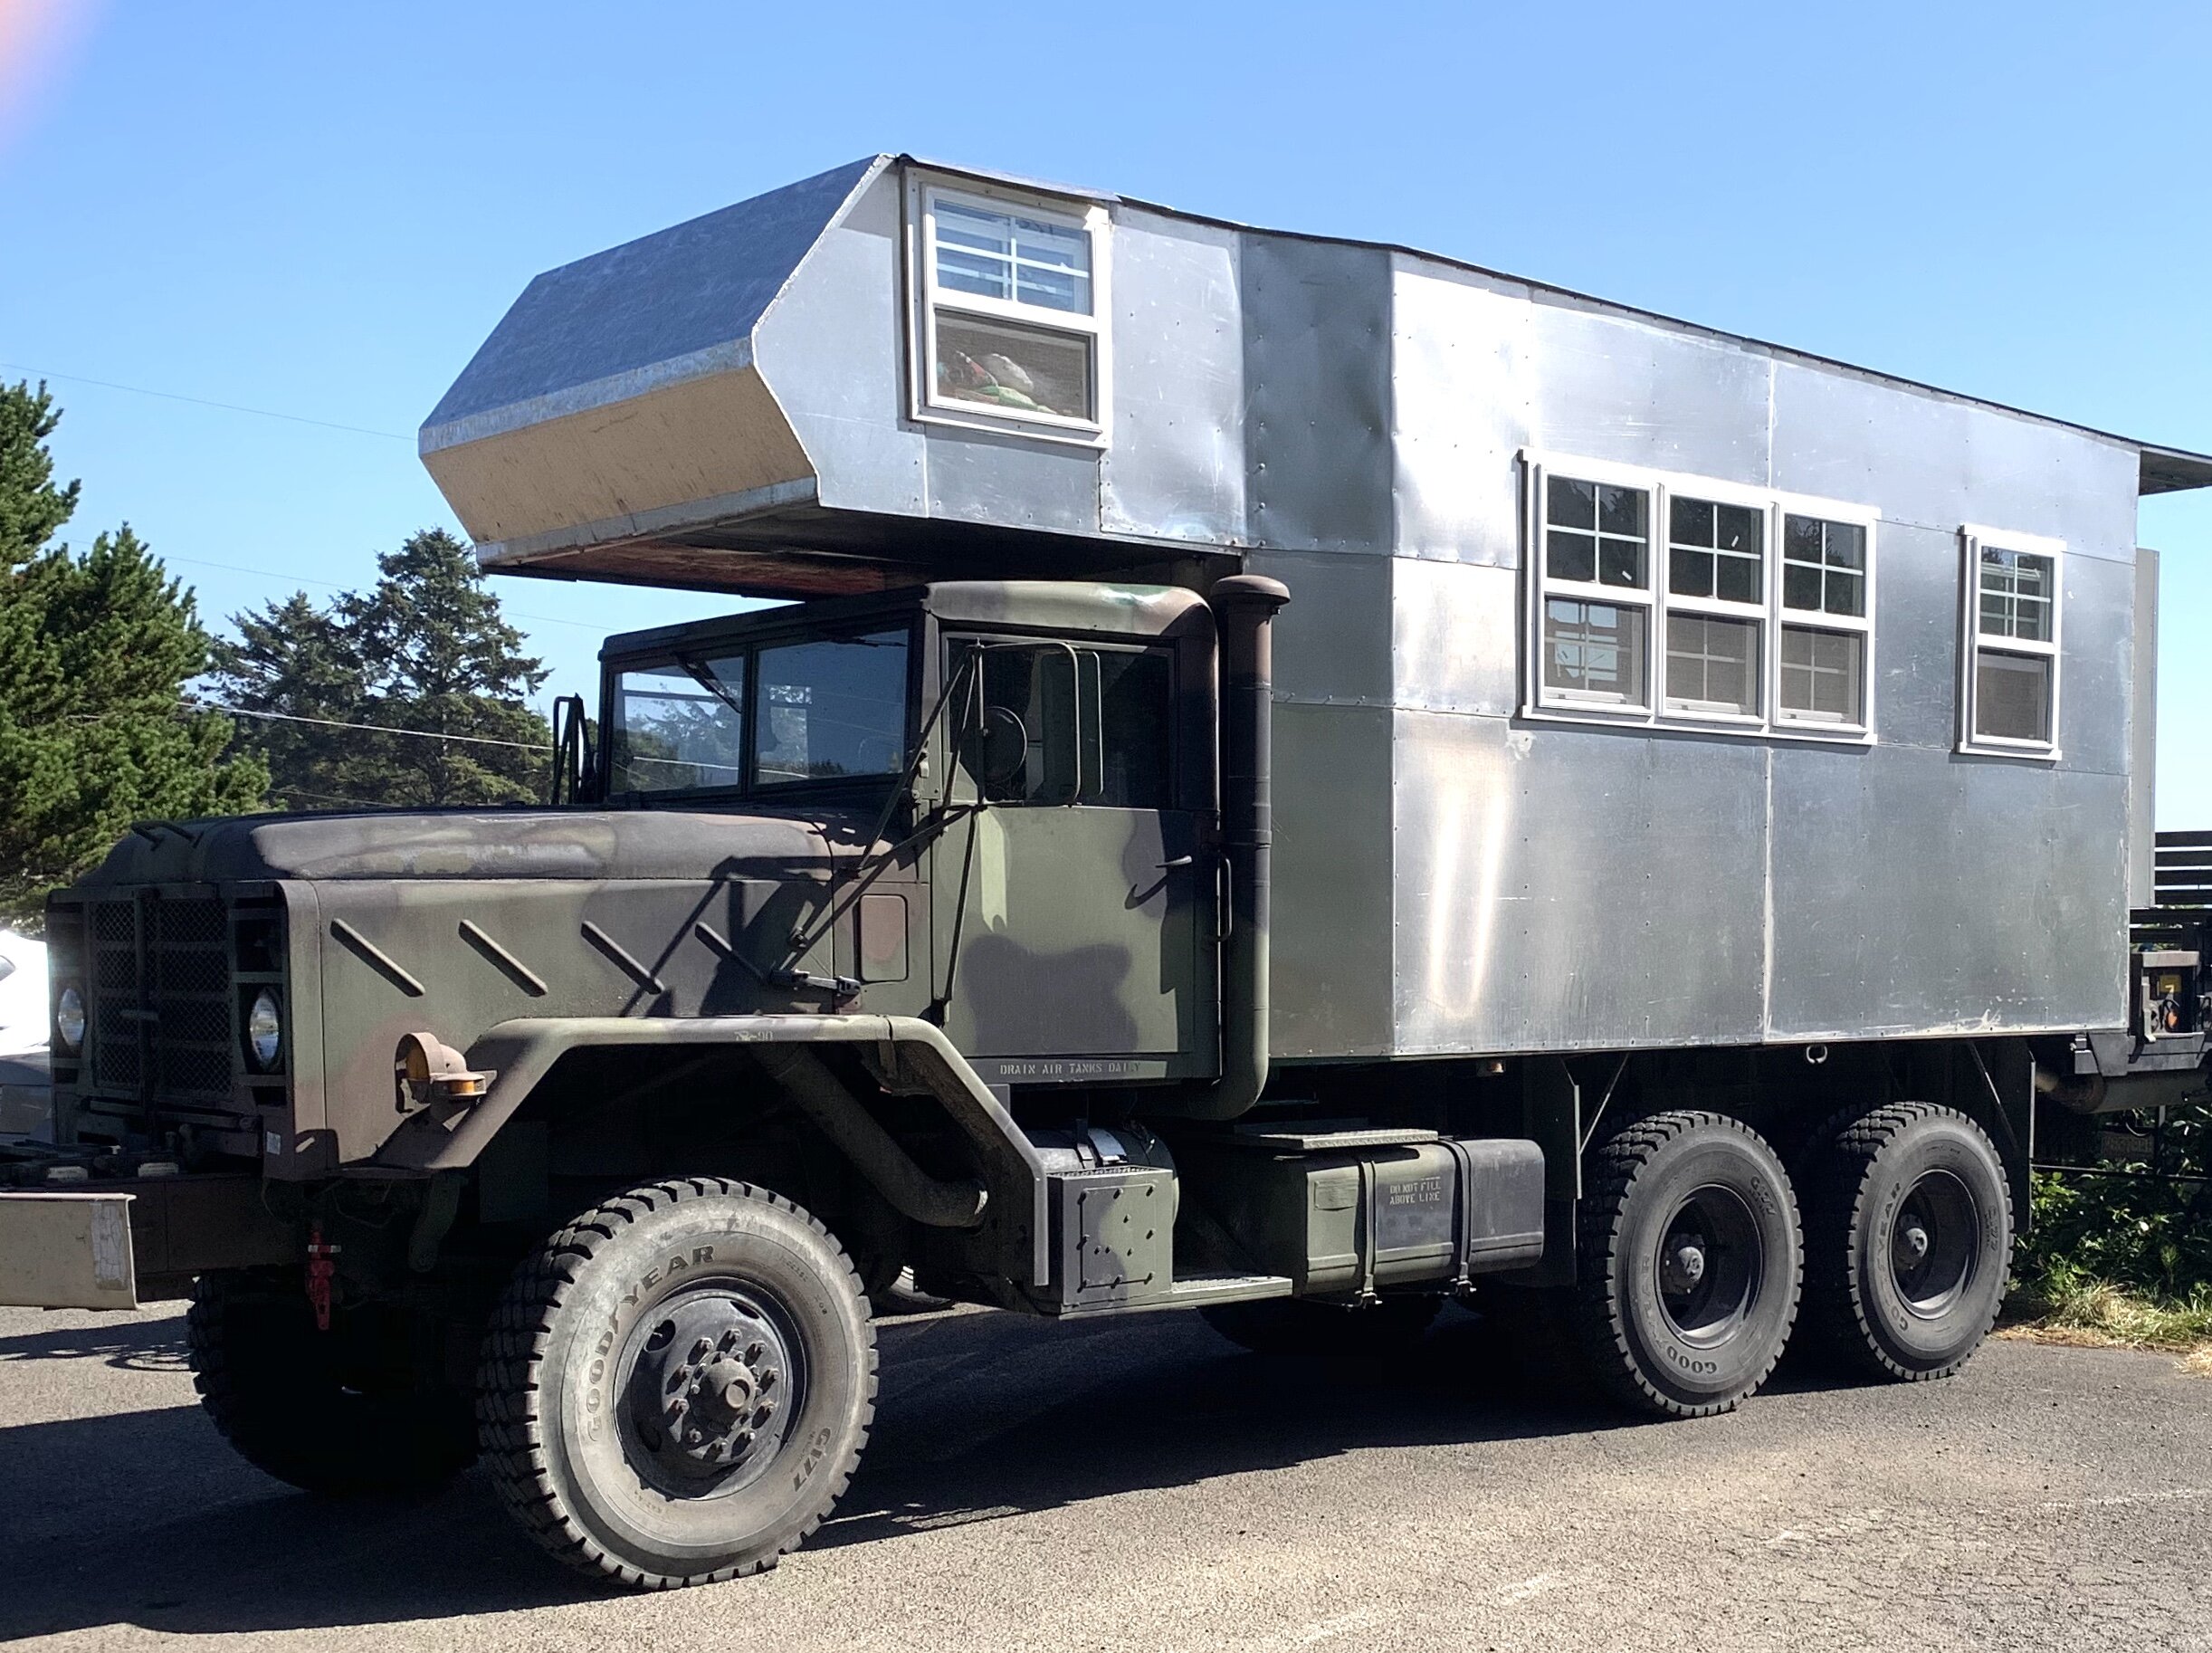  We’ve enjoyed featuring some of the unusual custom-made campers we’ve seen. In Newport, we spotted this impressive beast.  